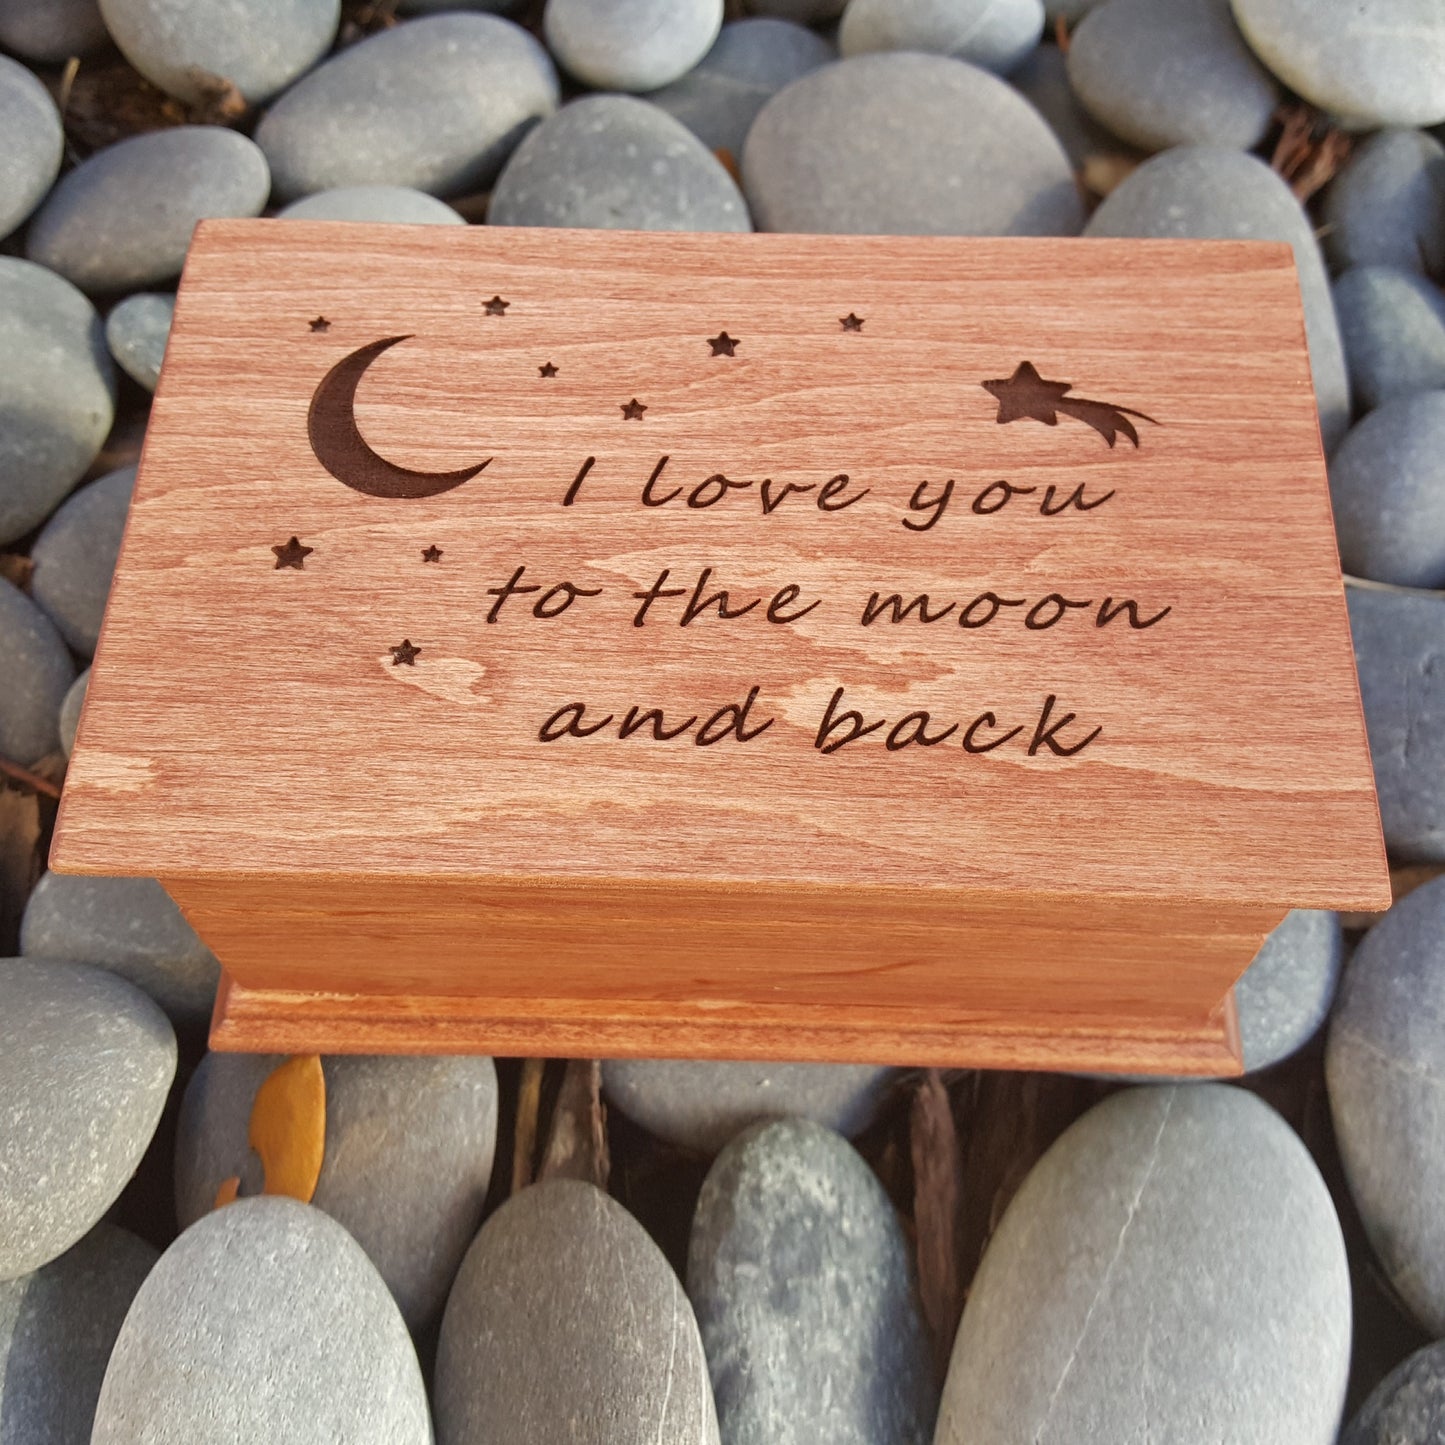 I love you to the moon and back jewelry box